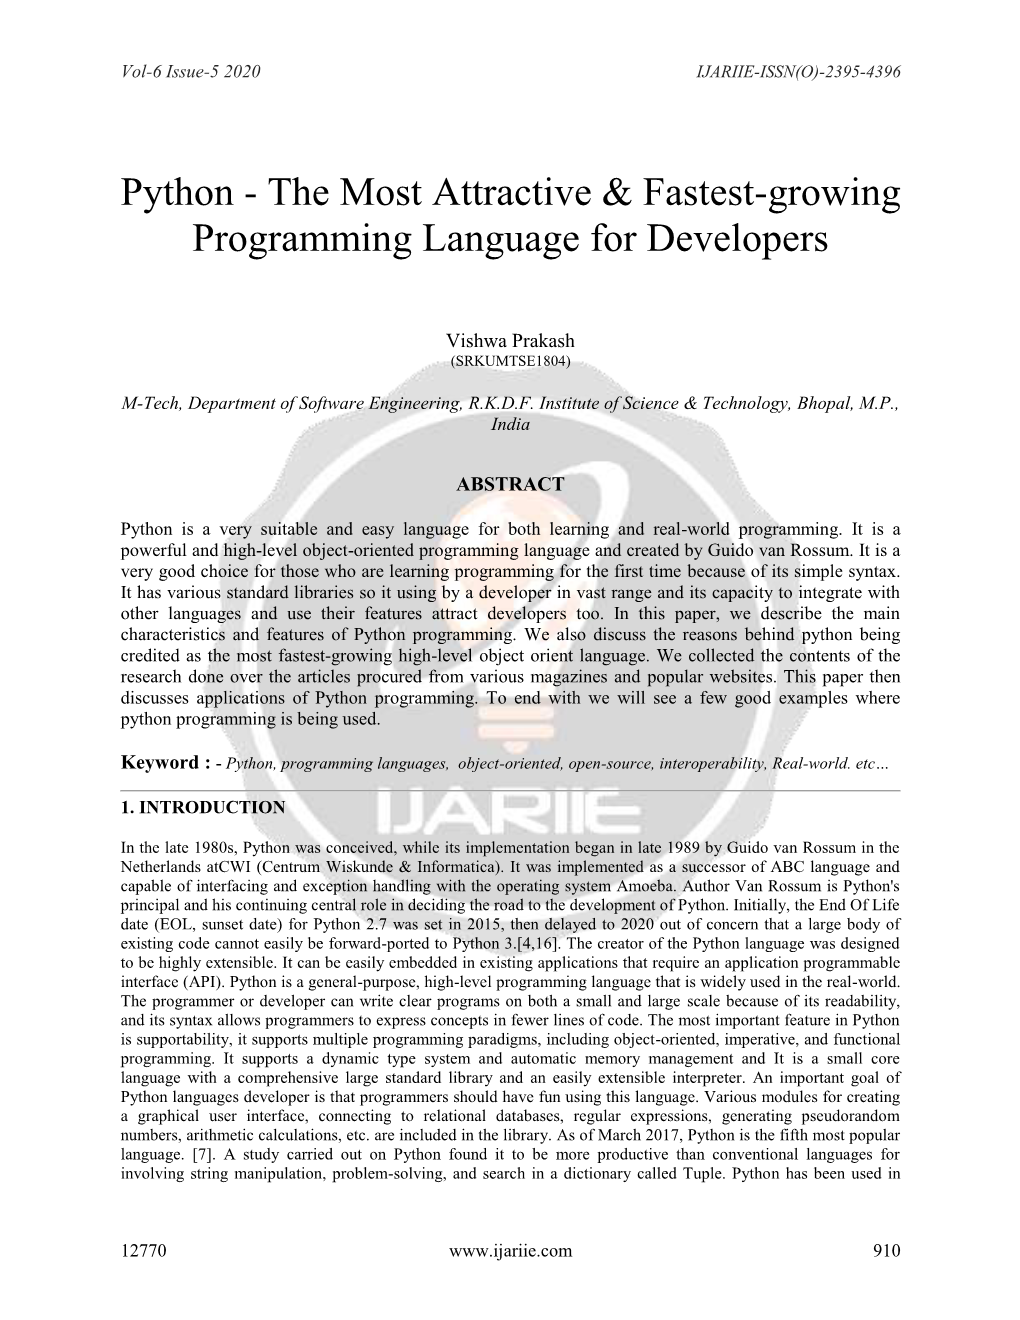 Python - the Most Attractive & Fastest-Growing Programming Language for Developers